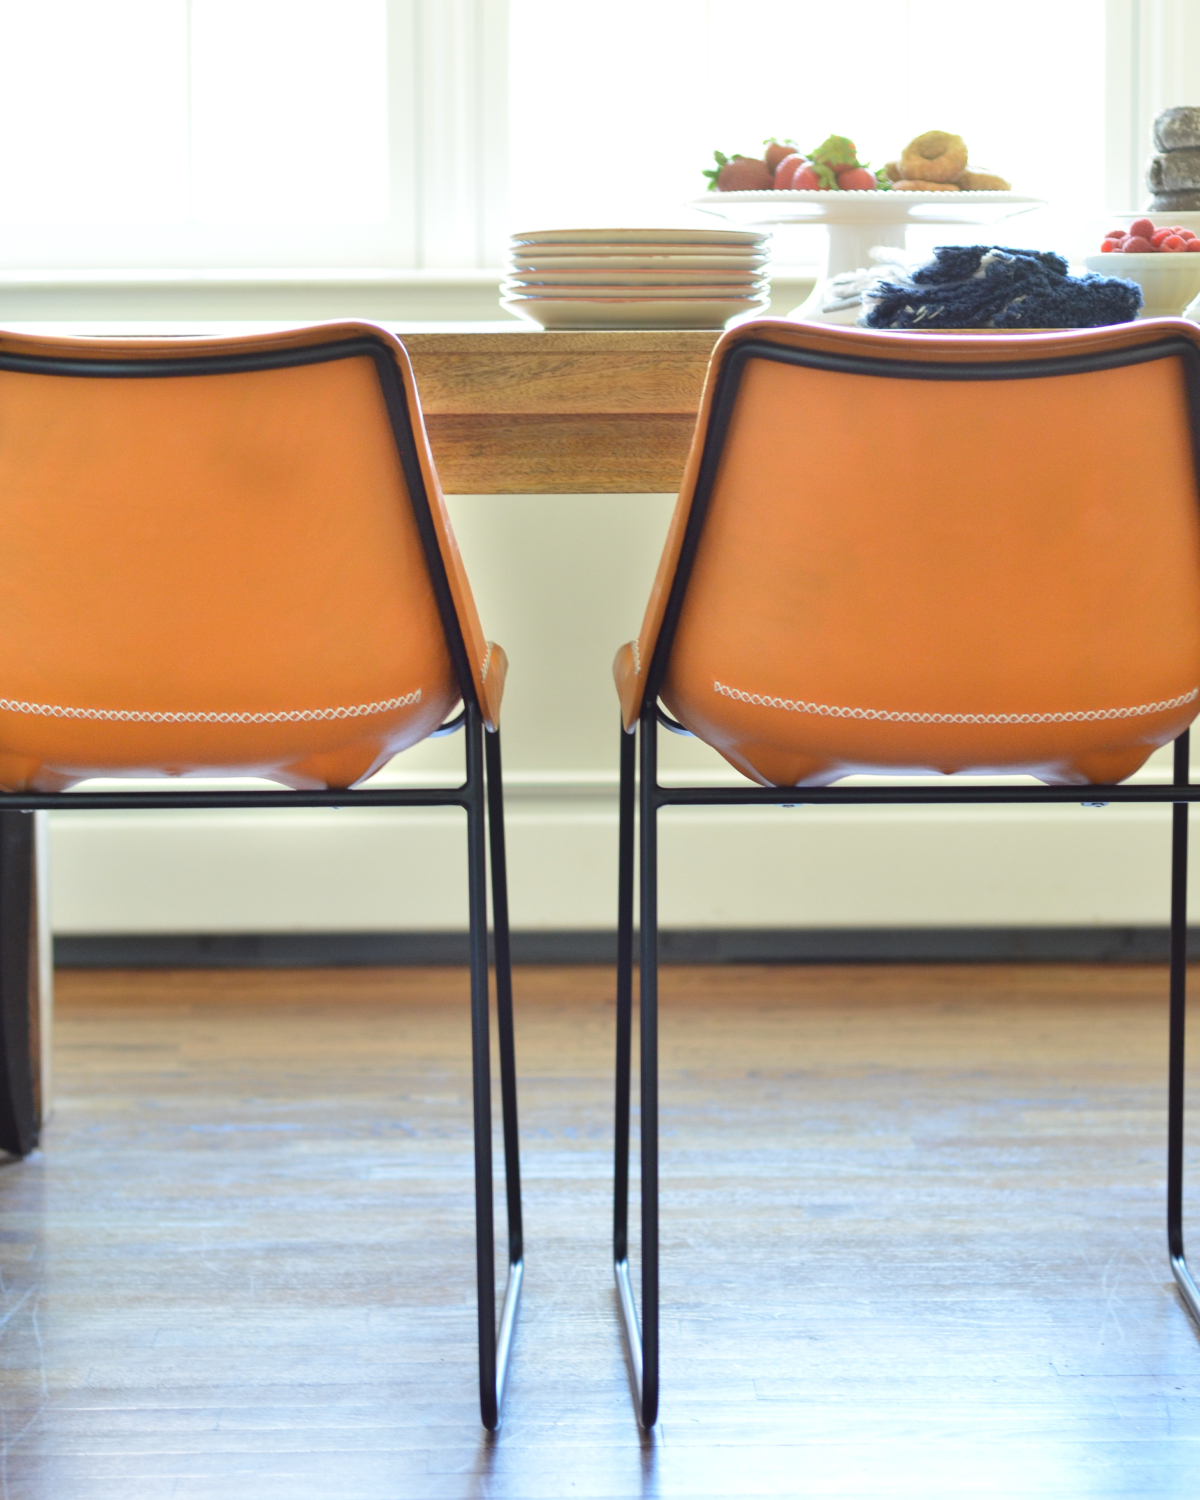 Leather side chairs in a breakfast nook makeover in process. Stylish, kid-friendly dining chairs can be hard to find but these small-scale beauties fit the bill!